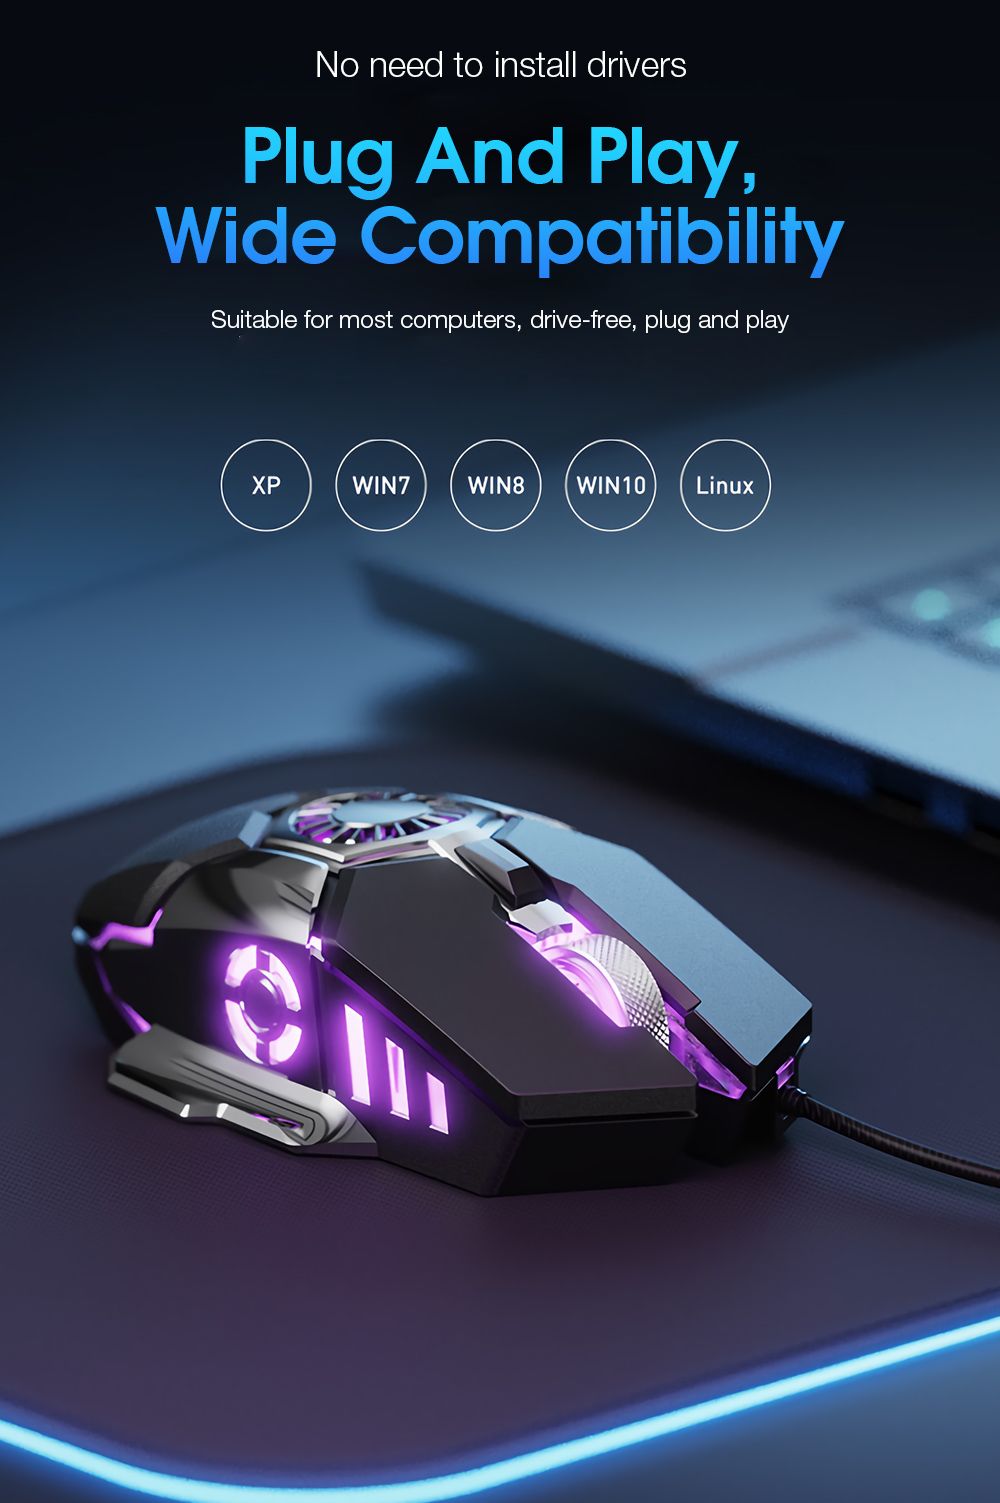 Inphic-X7-Wired-Cooling-Fan-Mouse-Macro-Programming-7200DPI-6-Buttons-Ergonomic-RGB-Backlight-Optica-1736042